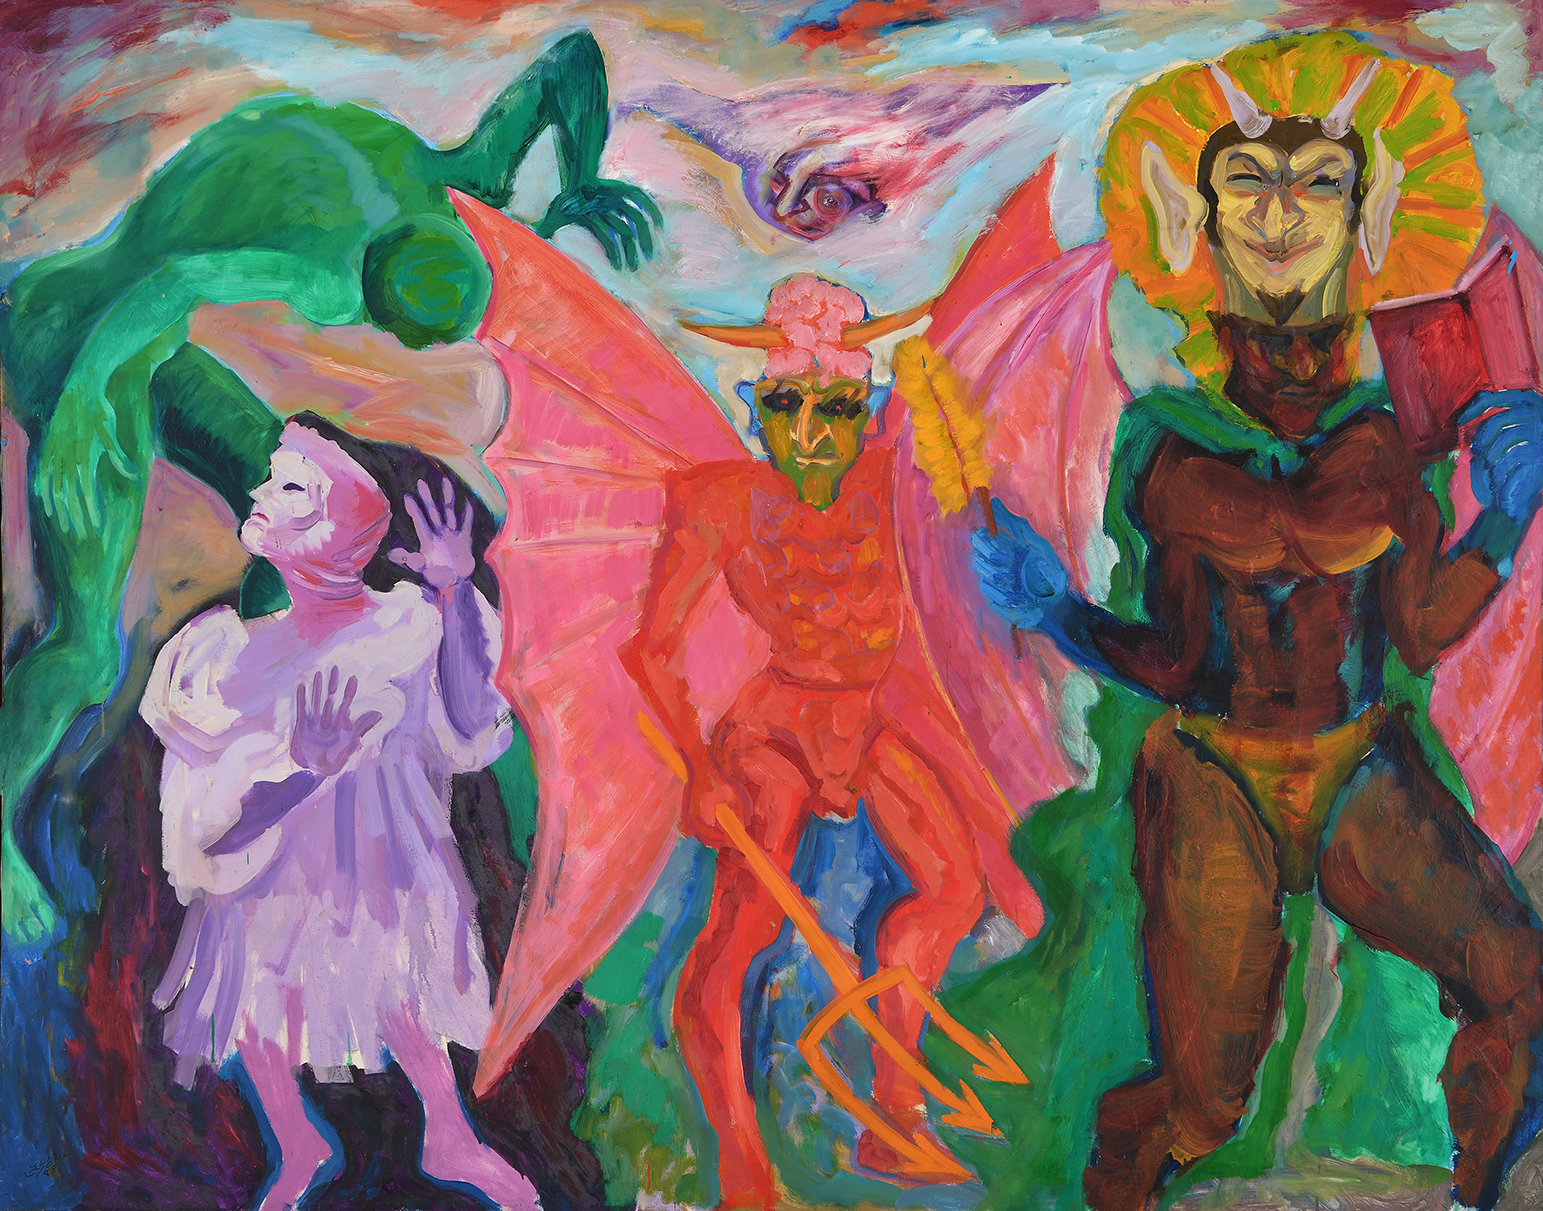 John Lyons, Before Ash Wednesday in Trinidad, 1988, oil on canvas, 1590 x 2030 mm (1630 x 2075 mm, framed)